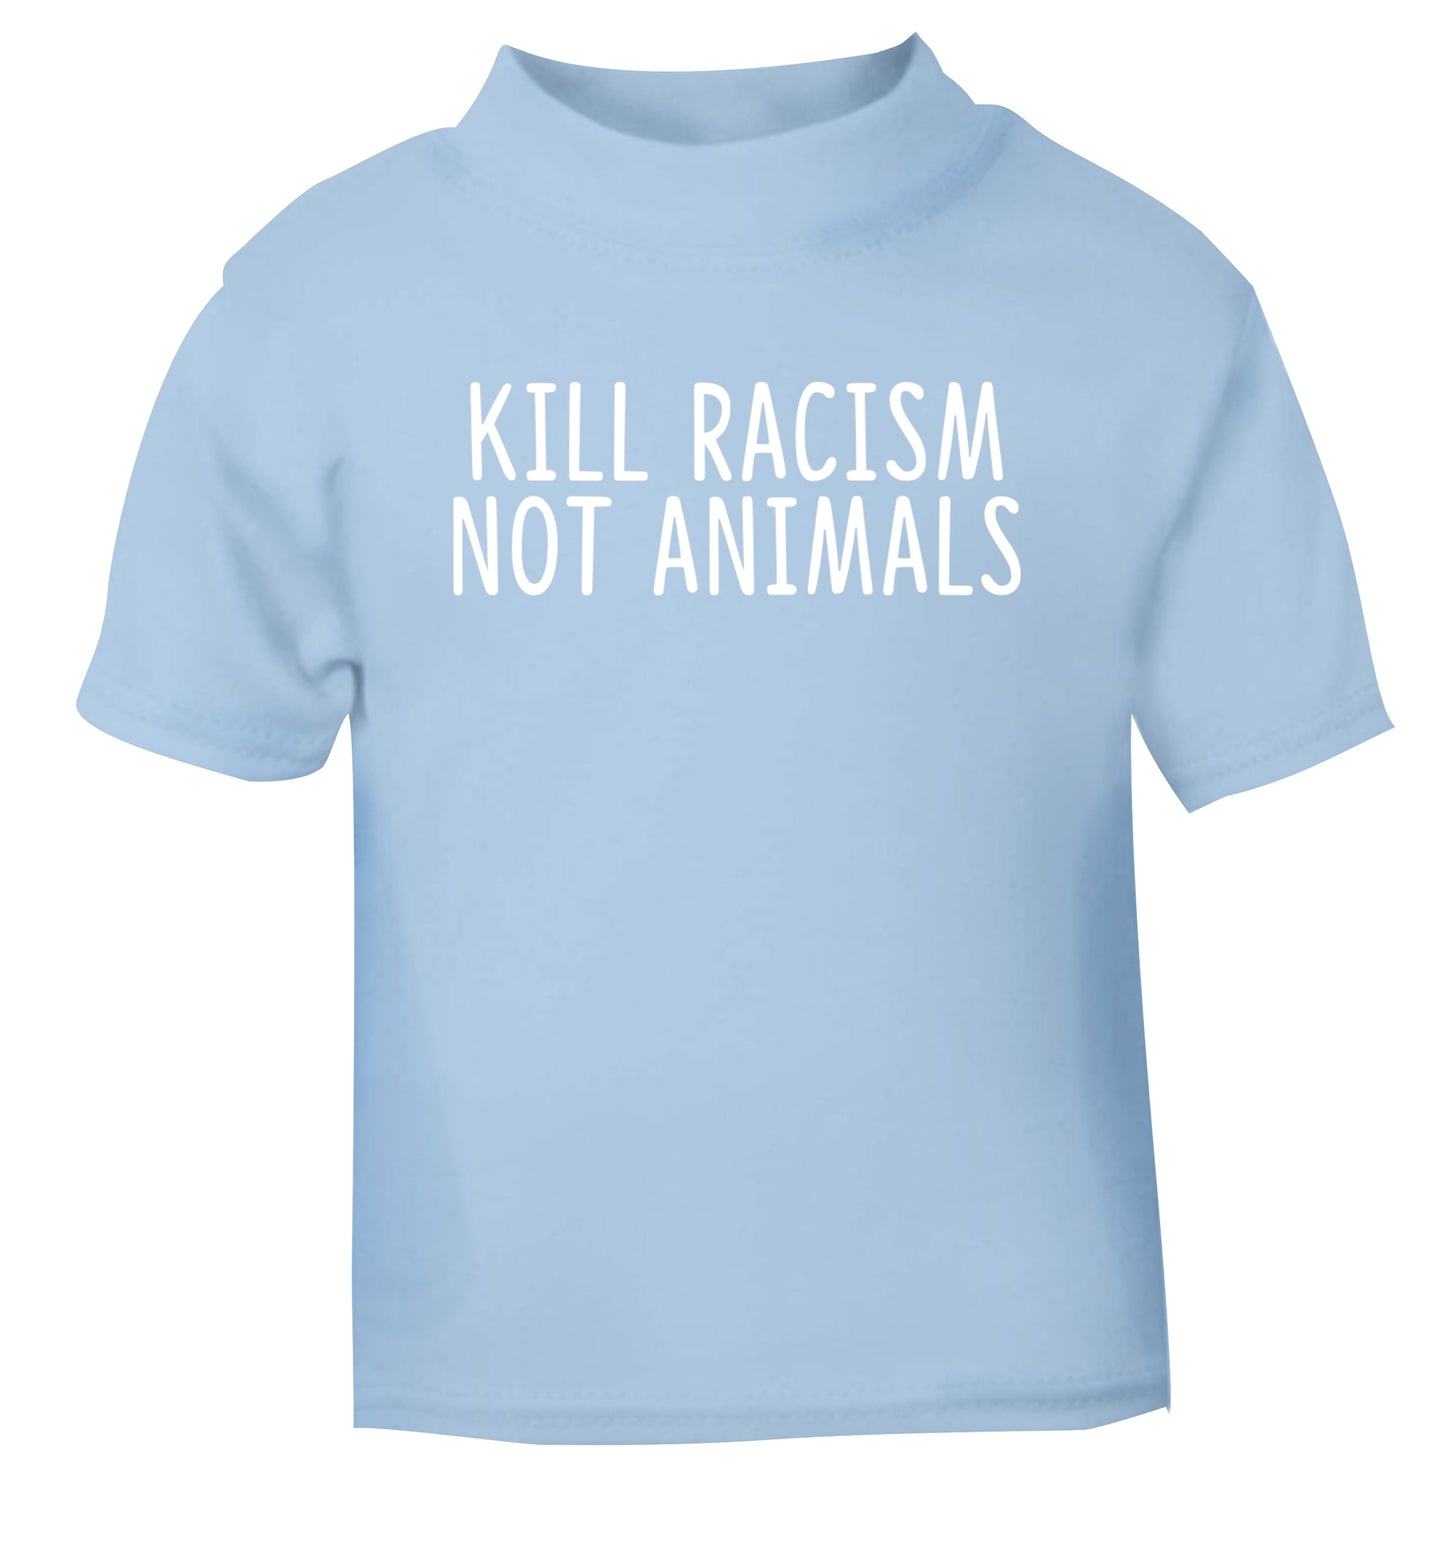 Kill Racism Not Animals light blue Baby Toddler Tshirt 2 Years